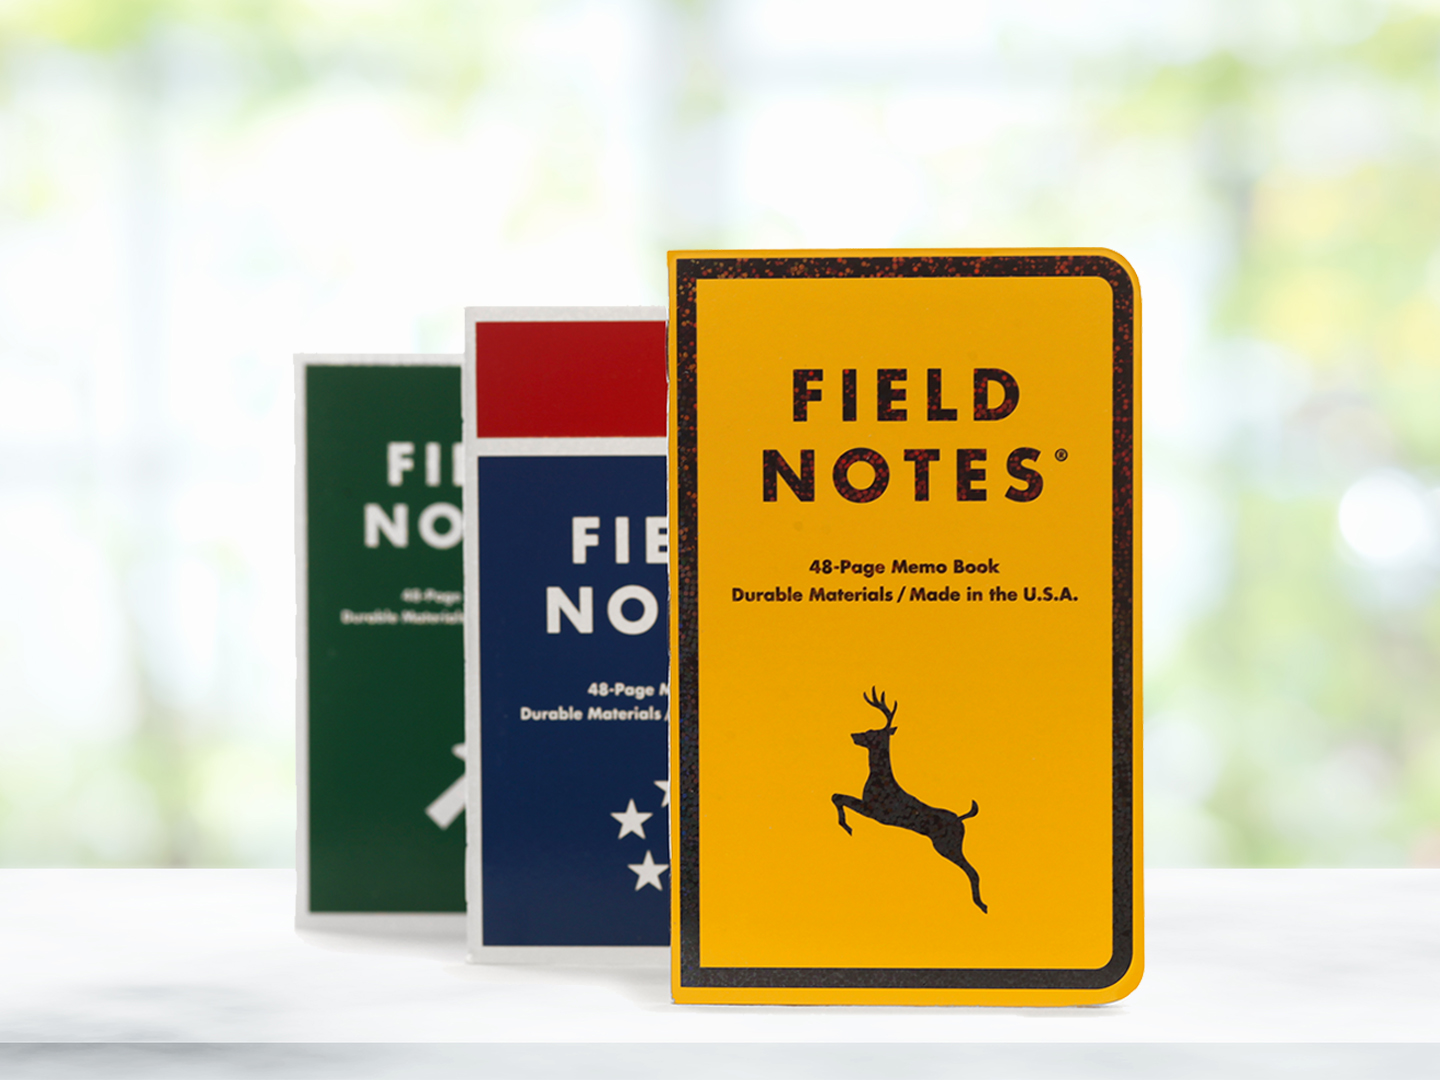 field notes consumer paper products